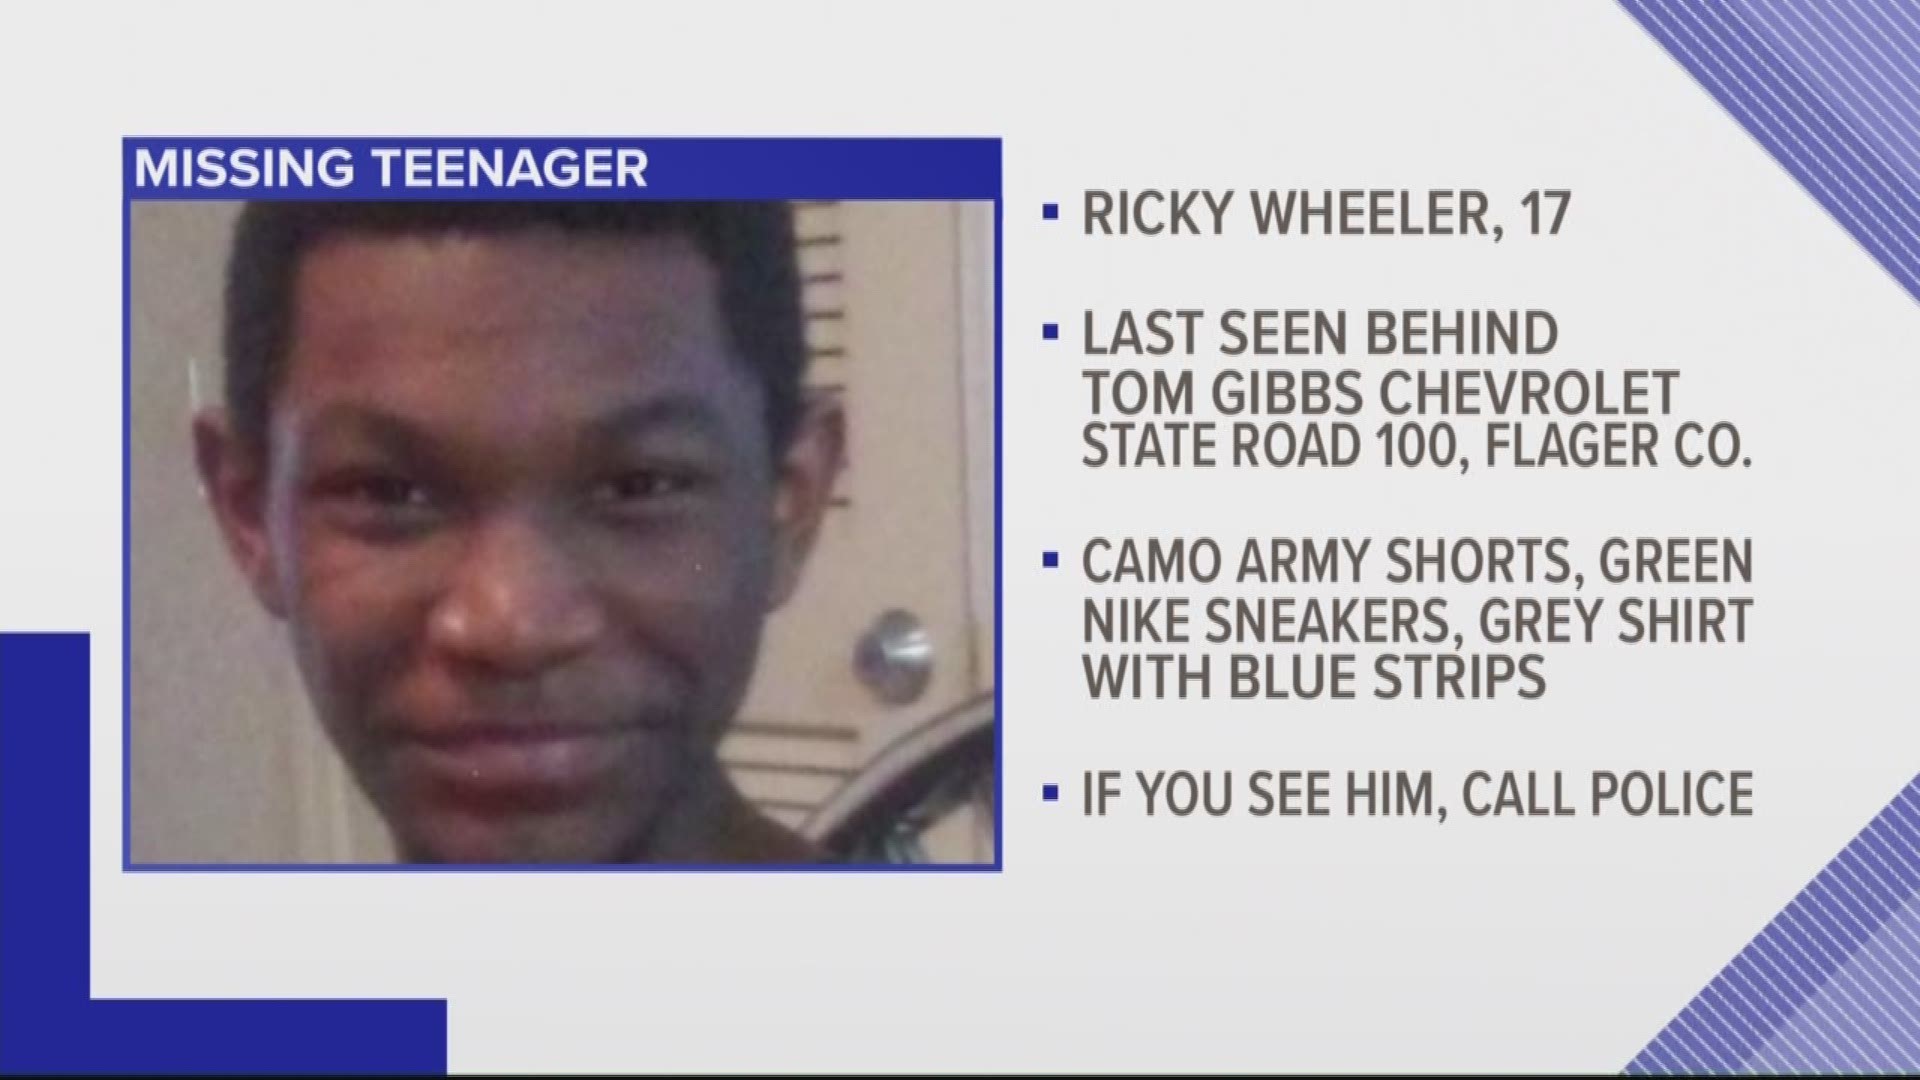 The Flagler County Sheriff's Office is seeking the public's help in locating missing 17-year-old Ricky Wheeler.